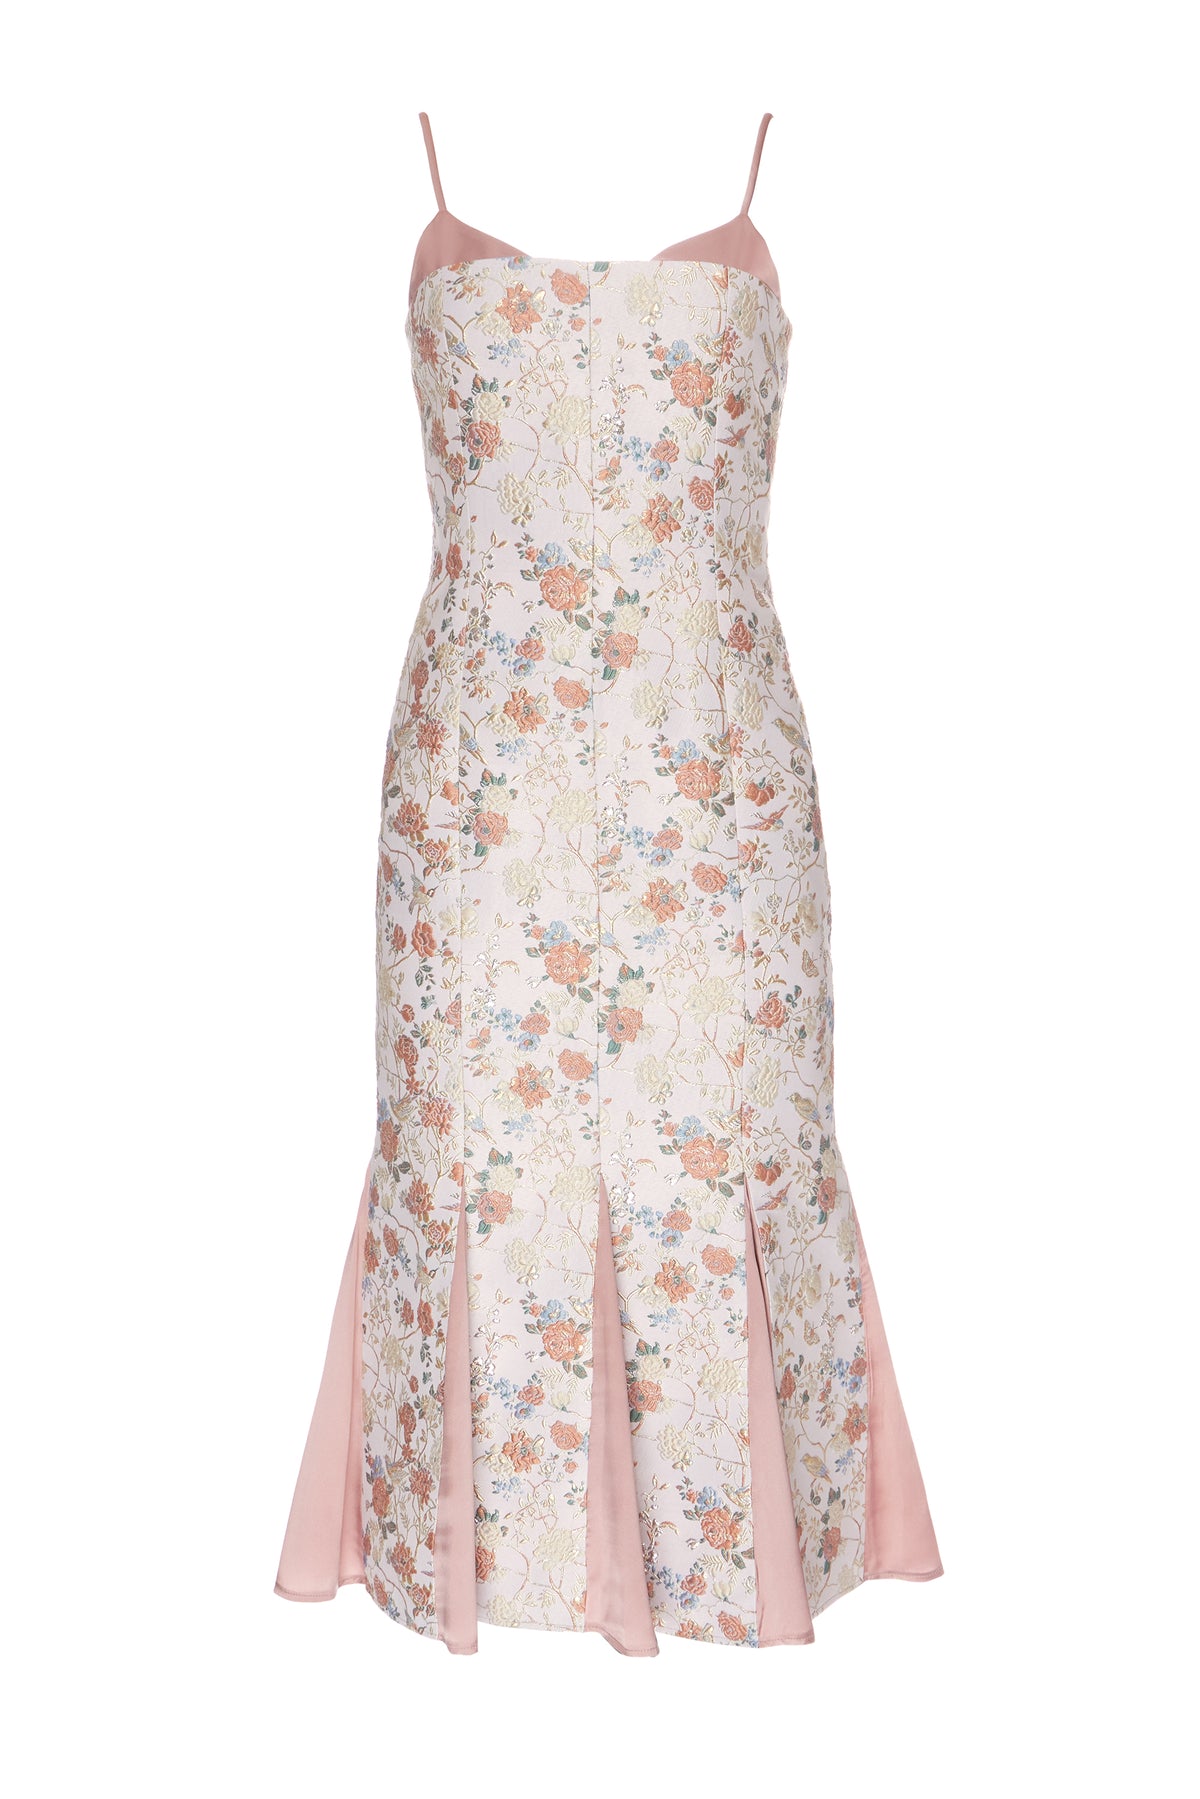 Penny Dress in Blush Floral Brocade